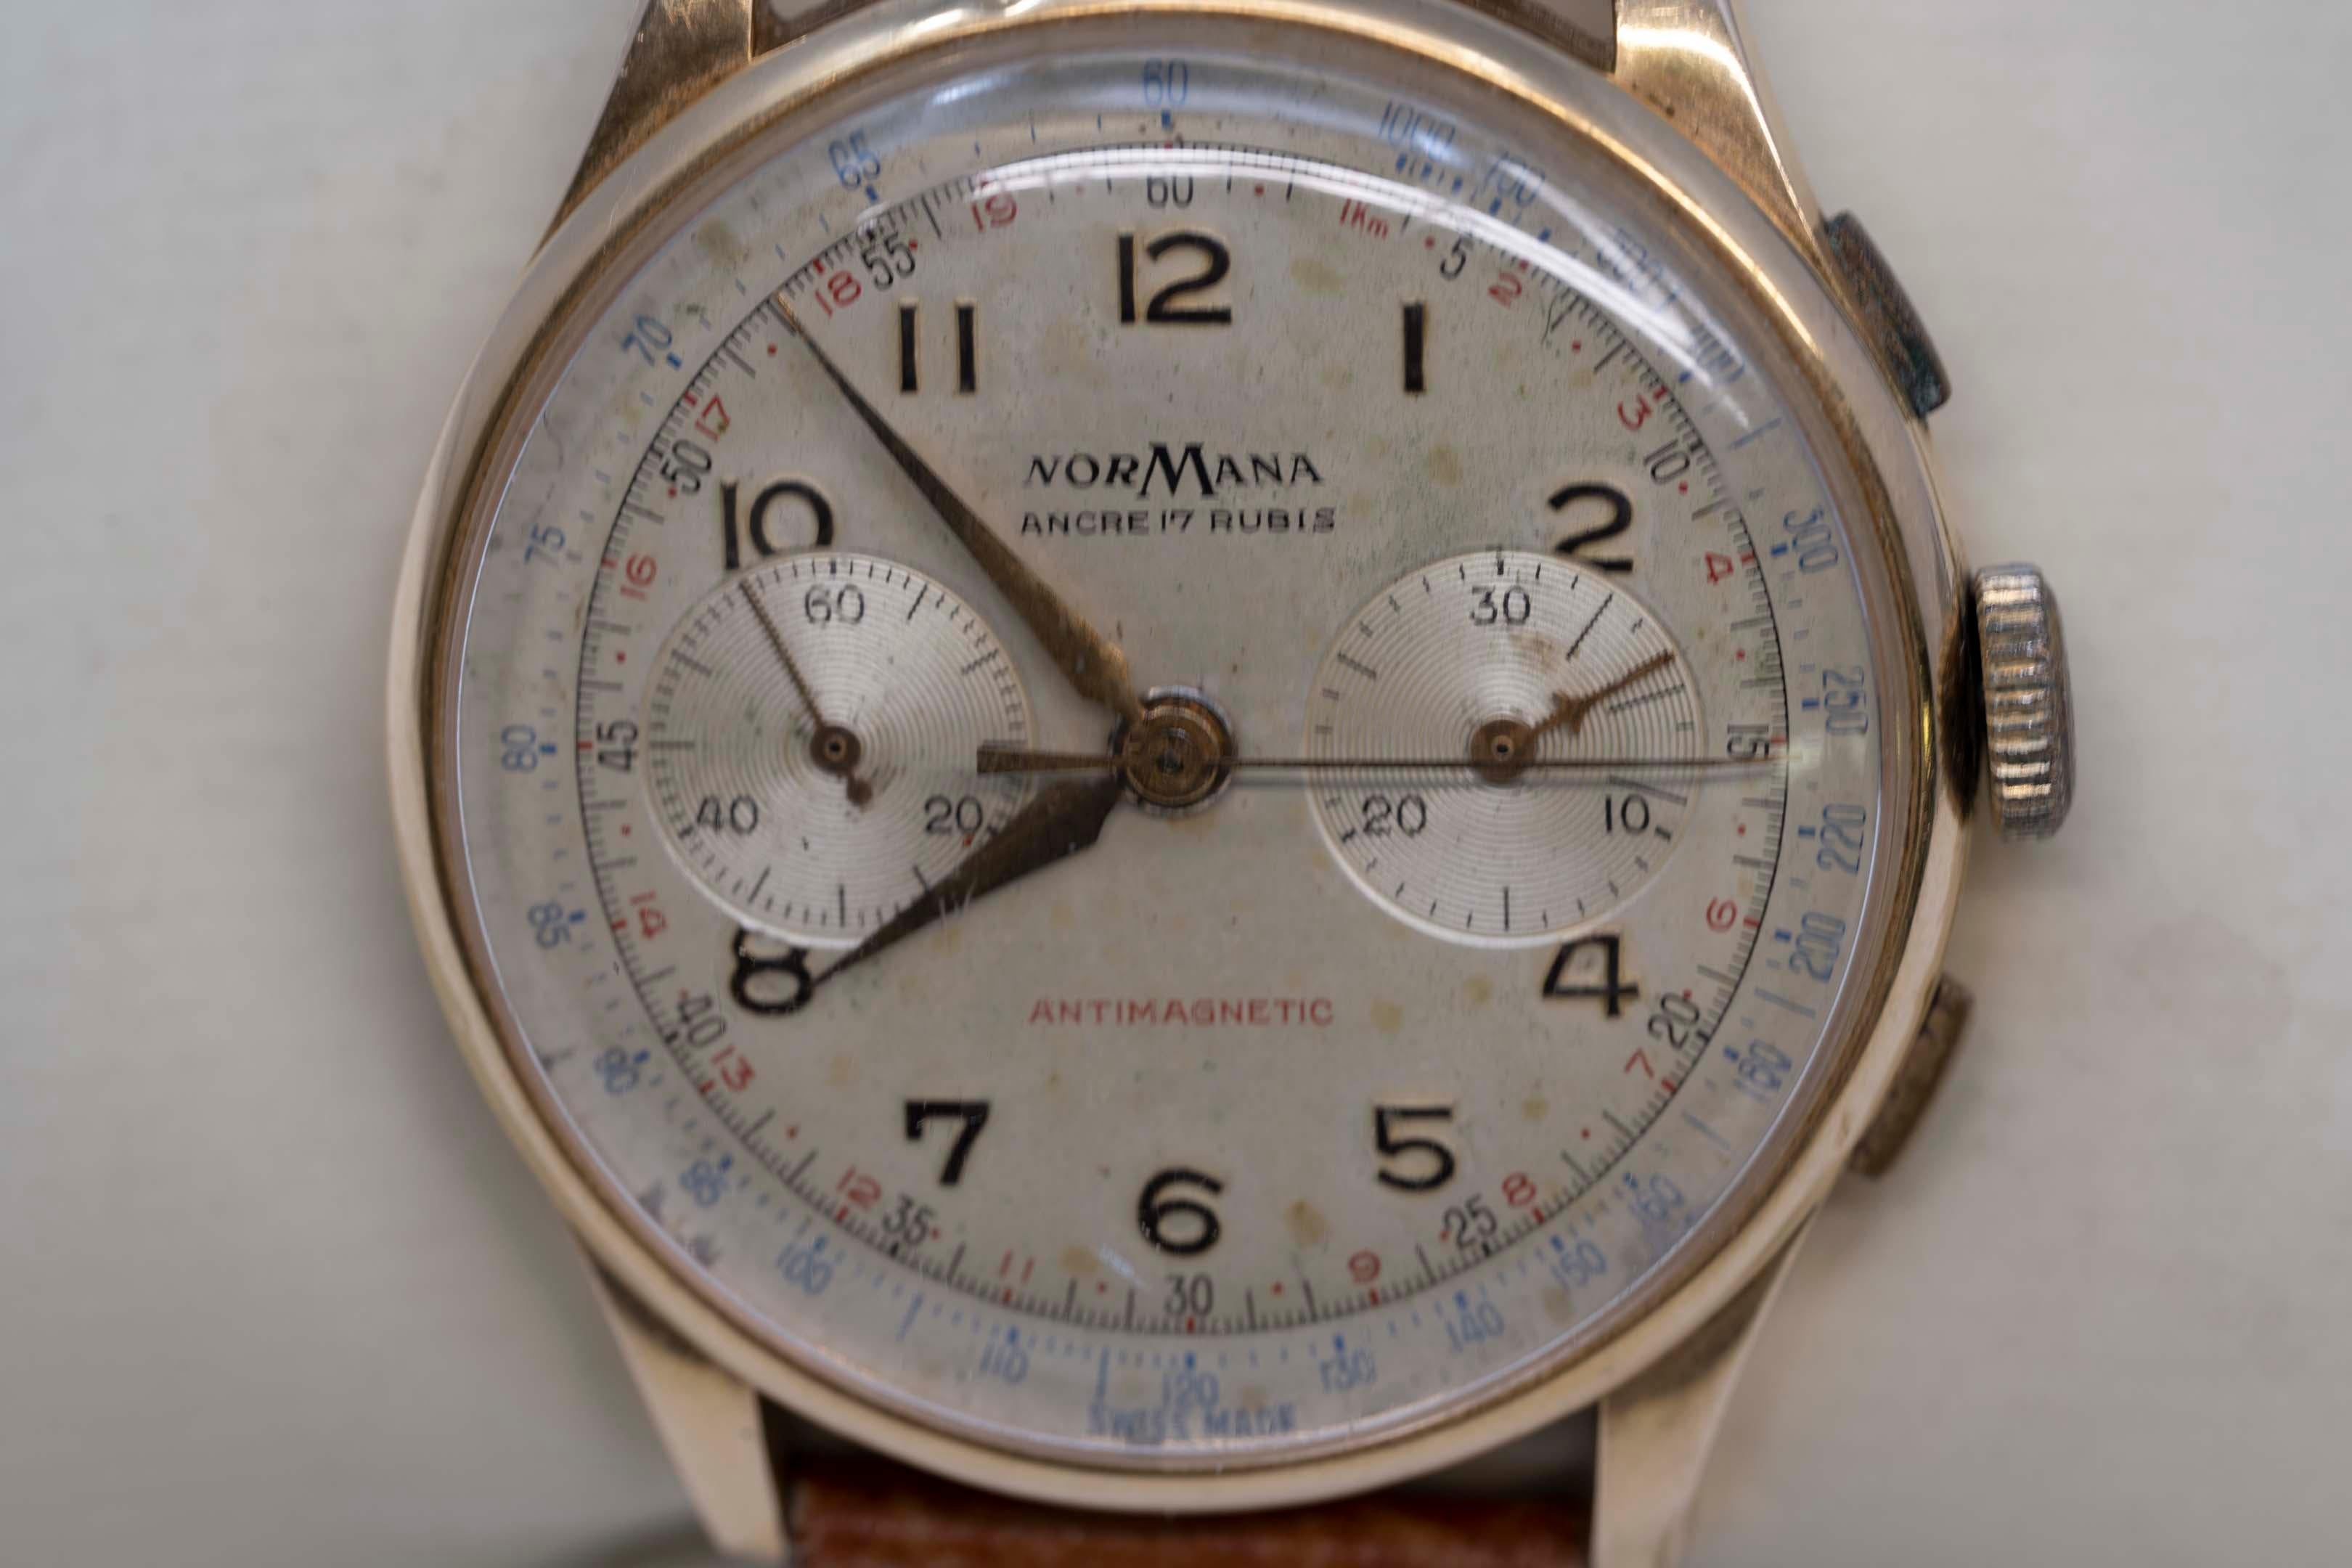 One vintage wristwatch for men marked NorMana. 18k (750, stamped), mechanical movement, chronometer. Tissot brown colored bracelet. Weighs 49.1 grams. 38mm case without the crown. Crown is not the original. 
